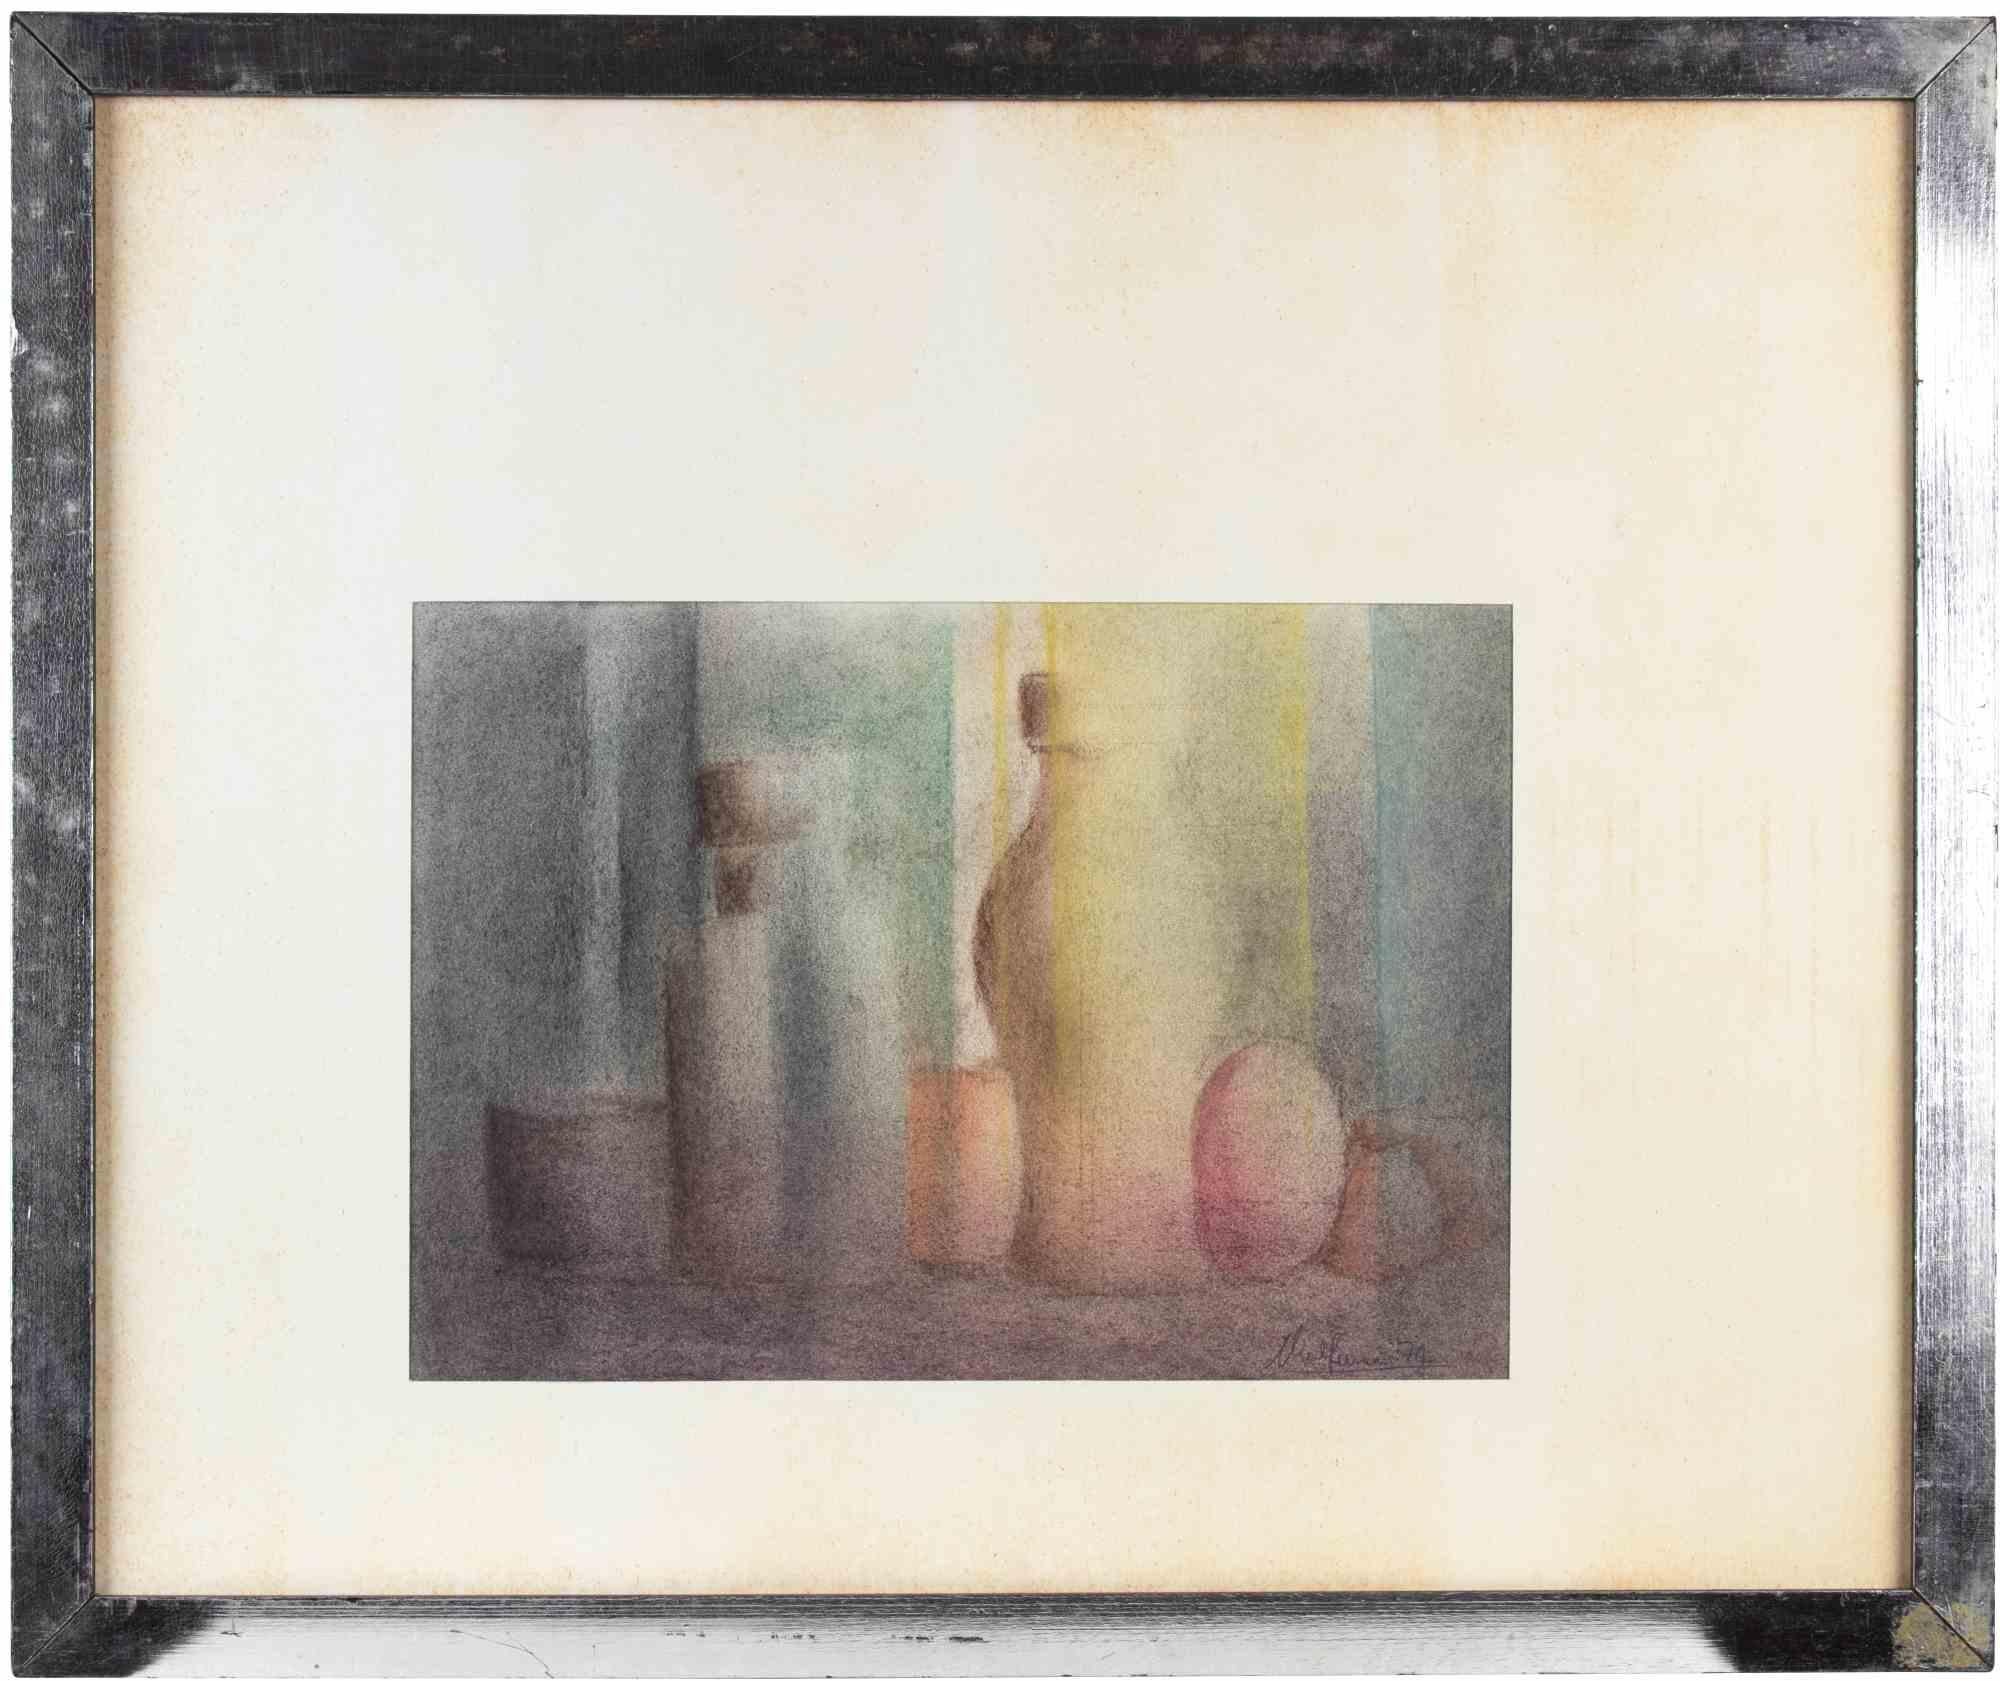 Vases is a contemporary artwork realized by Alfredo Malferrari.

Mixed colored drawing.

Hand signed and dated on the lower margin

Includes frame

Fair conditions